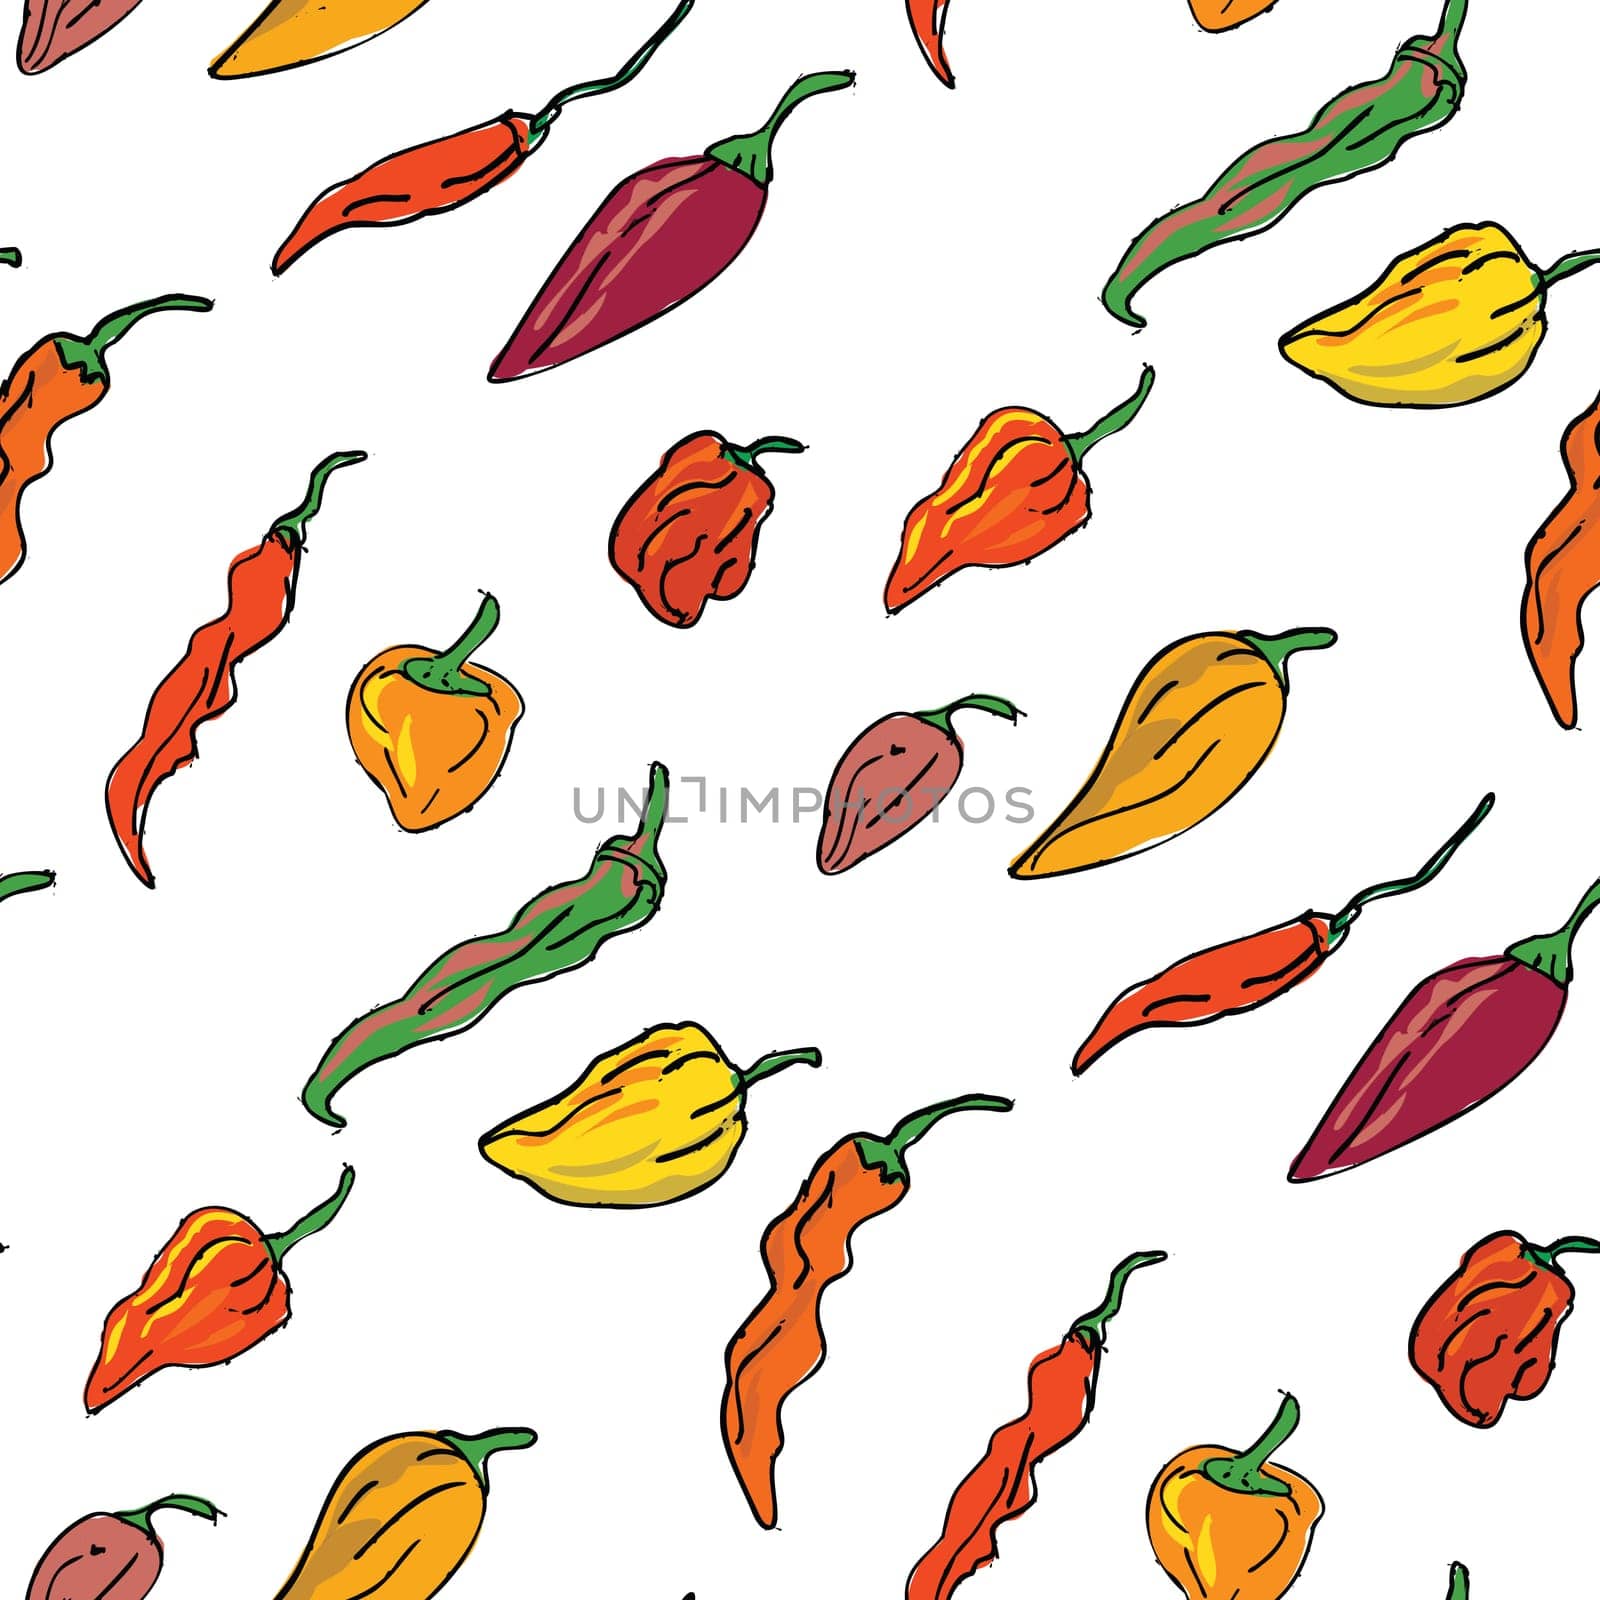 hot-chili-pepper-DWG-TILE-PATTERN by patrimonio